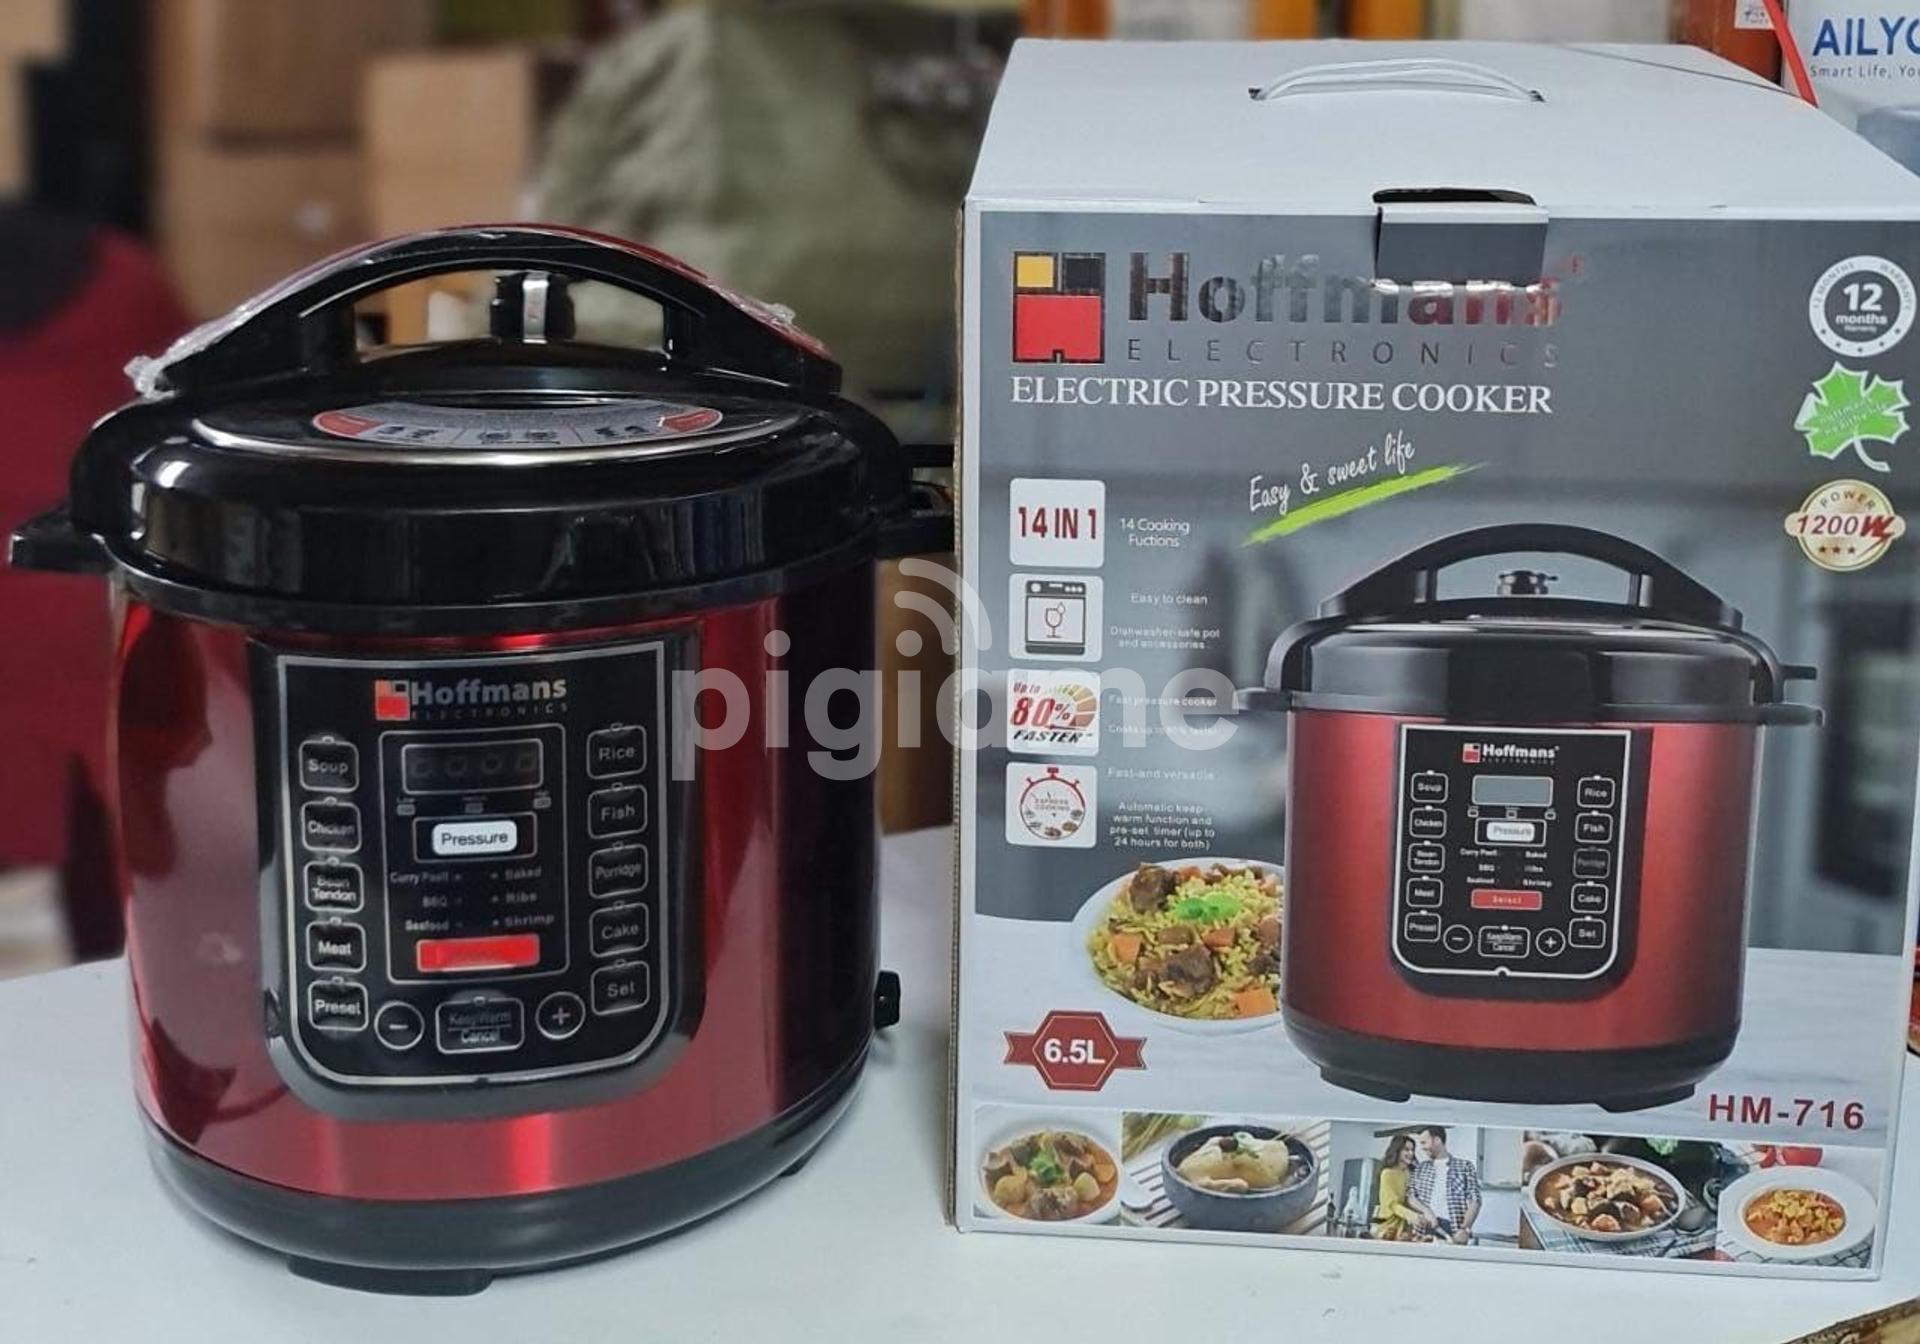 Hoffmans 14in1 Electric Pressure Cooker 6.5L HM-716